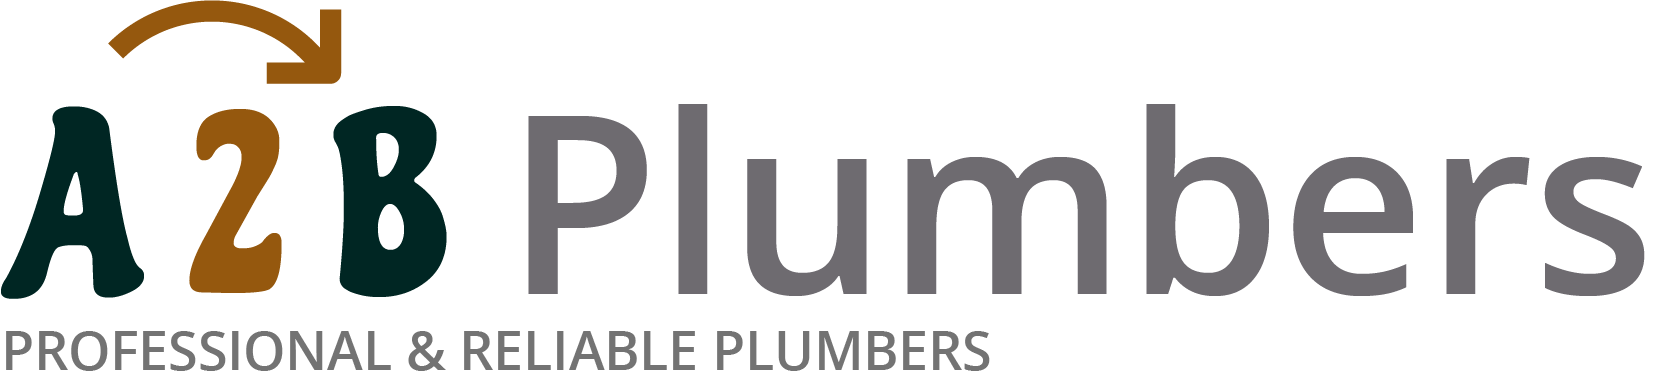 If you need a boiler installed, a radiator repaired or a leaking tap fixed, call us now - we provide services for properties in Loughborough and the local area.